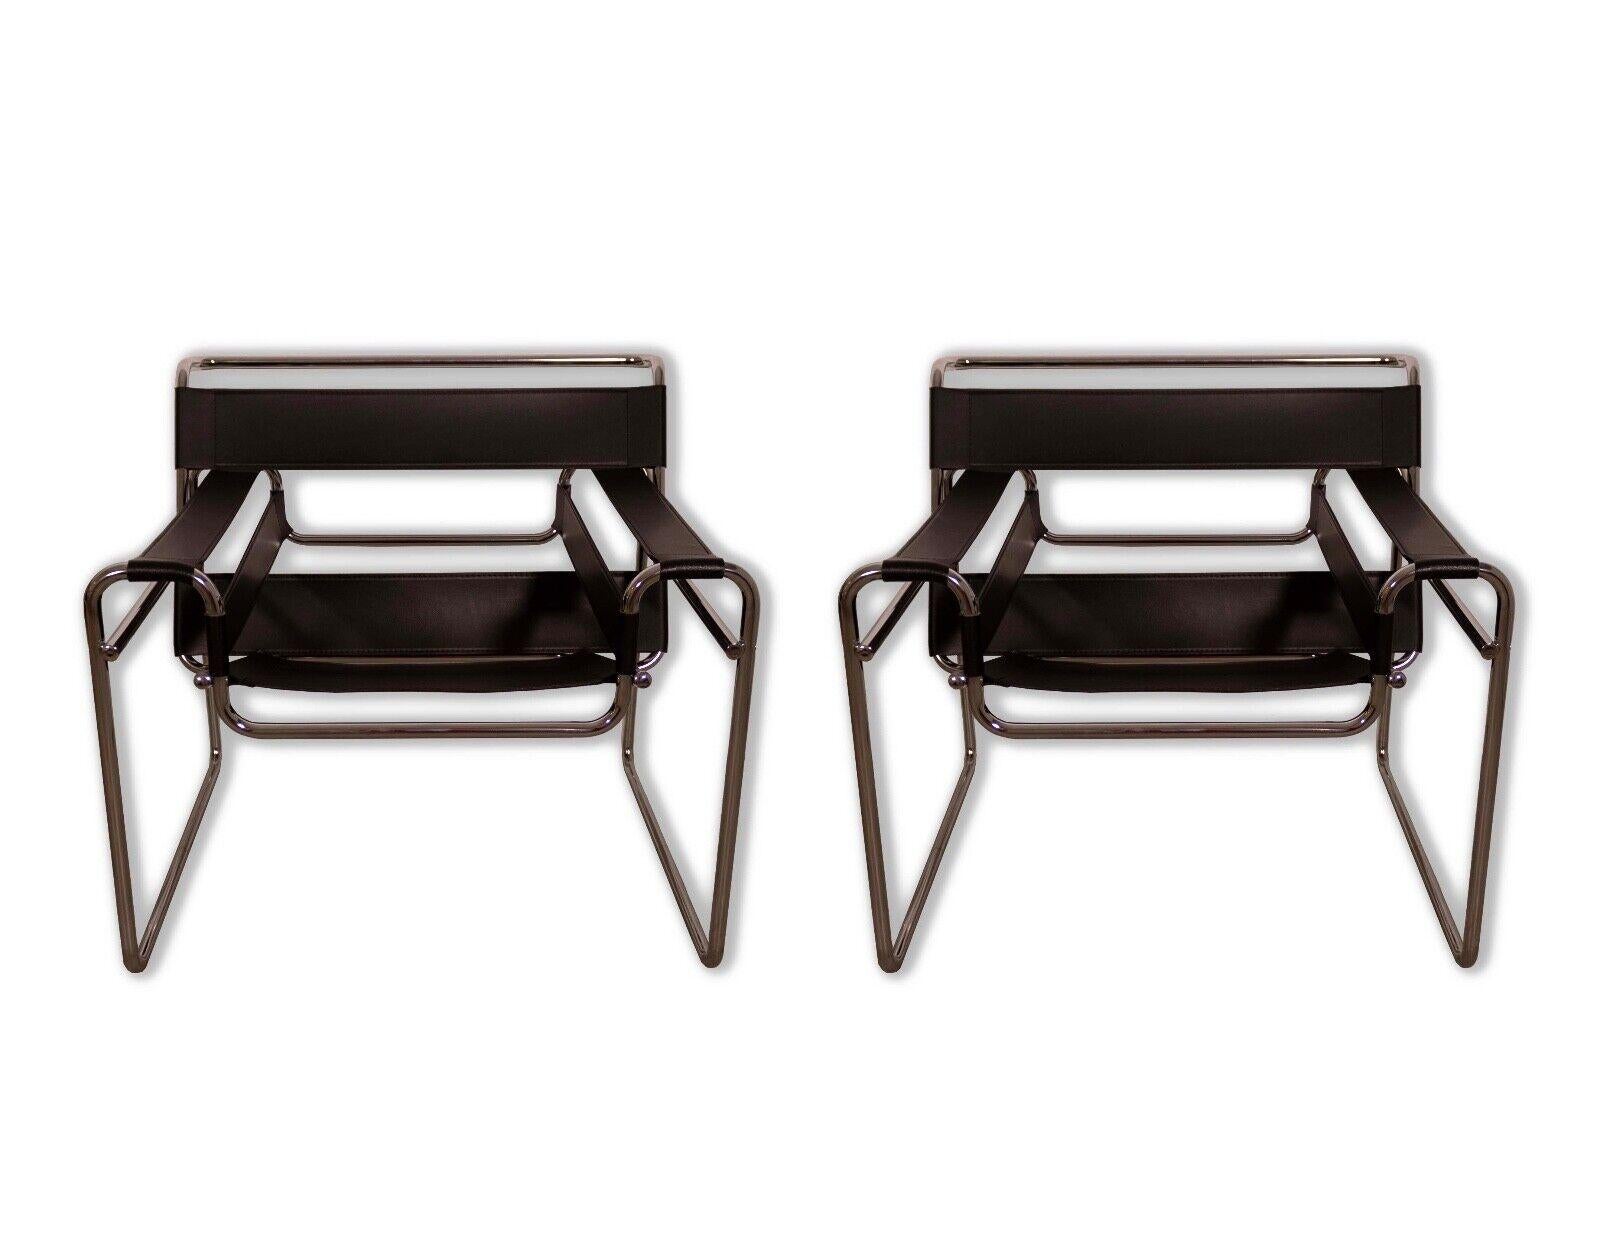 This pair of Black Leather and Chrome Wassily Style Chairs exude the timeless elegance of Mid Century Modern design. Crafted with a perfect blend of sleek chrome frames and supple black leather upholstery, these chairs are a striking embodiment of